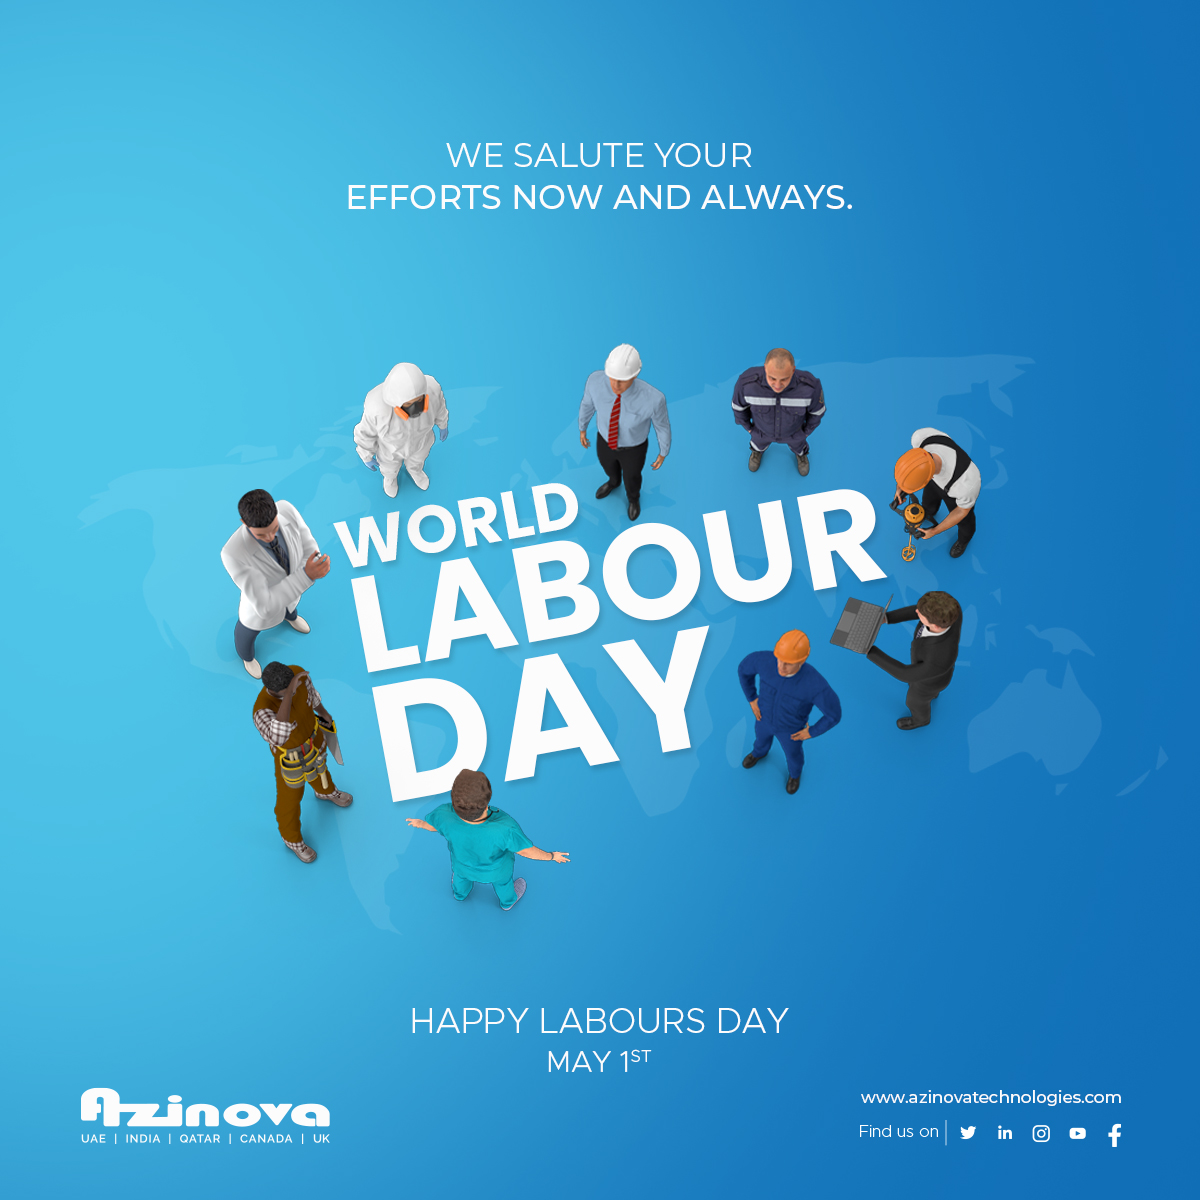 Today, we celebrate and thank all the hardworking people around the world for their dedication to making our lives better.

Azinova Technologies wishes you a Happy World Labour Day!

Save this post for later and follow our page now

#LaborDay #ThankYouWorkers #HardworkingPeople